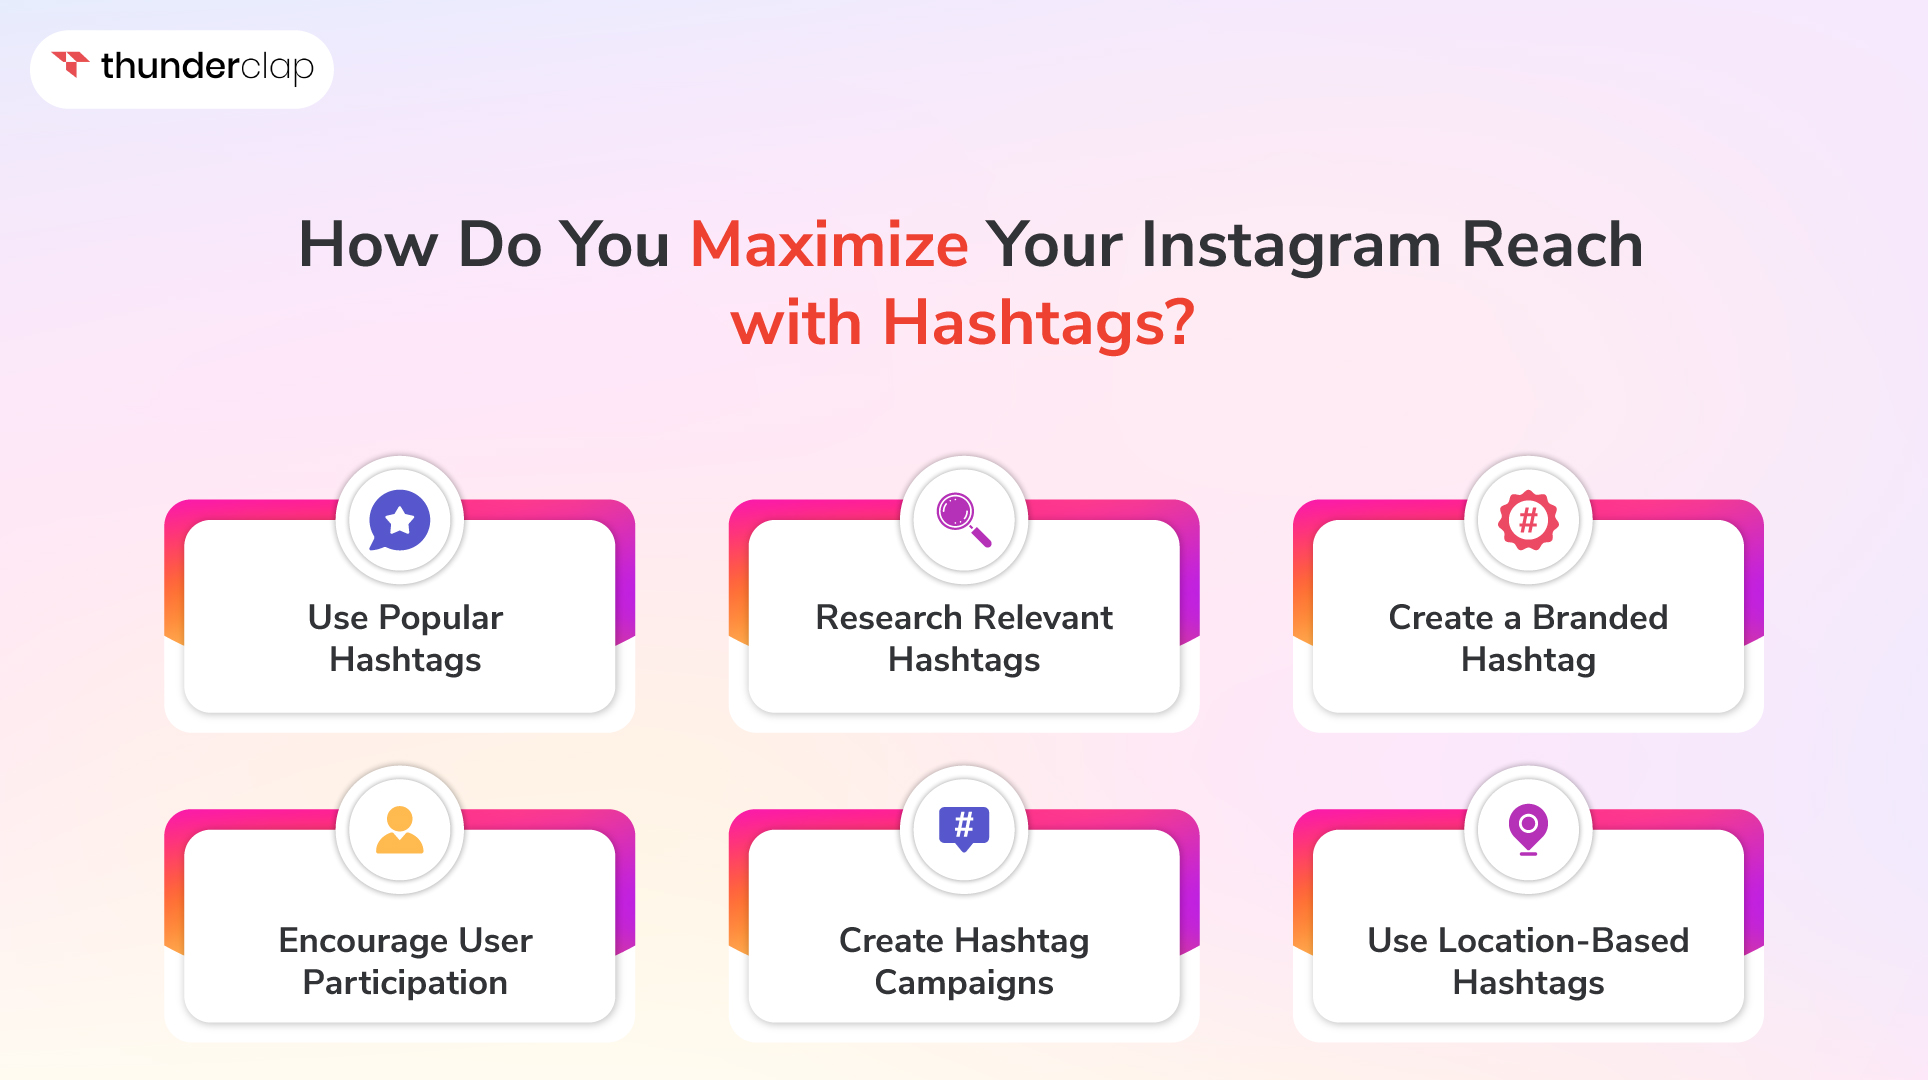 How Do You Maximize Your Instagram Reach with Hashtags